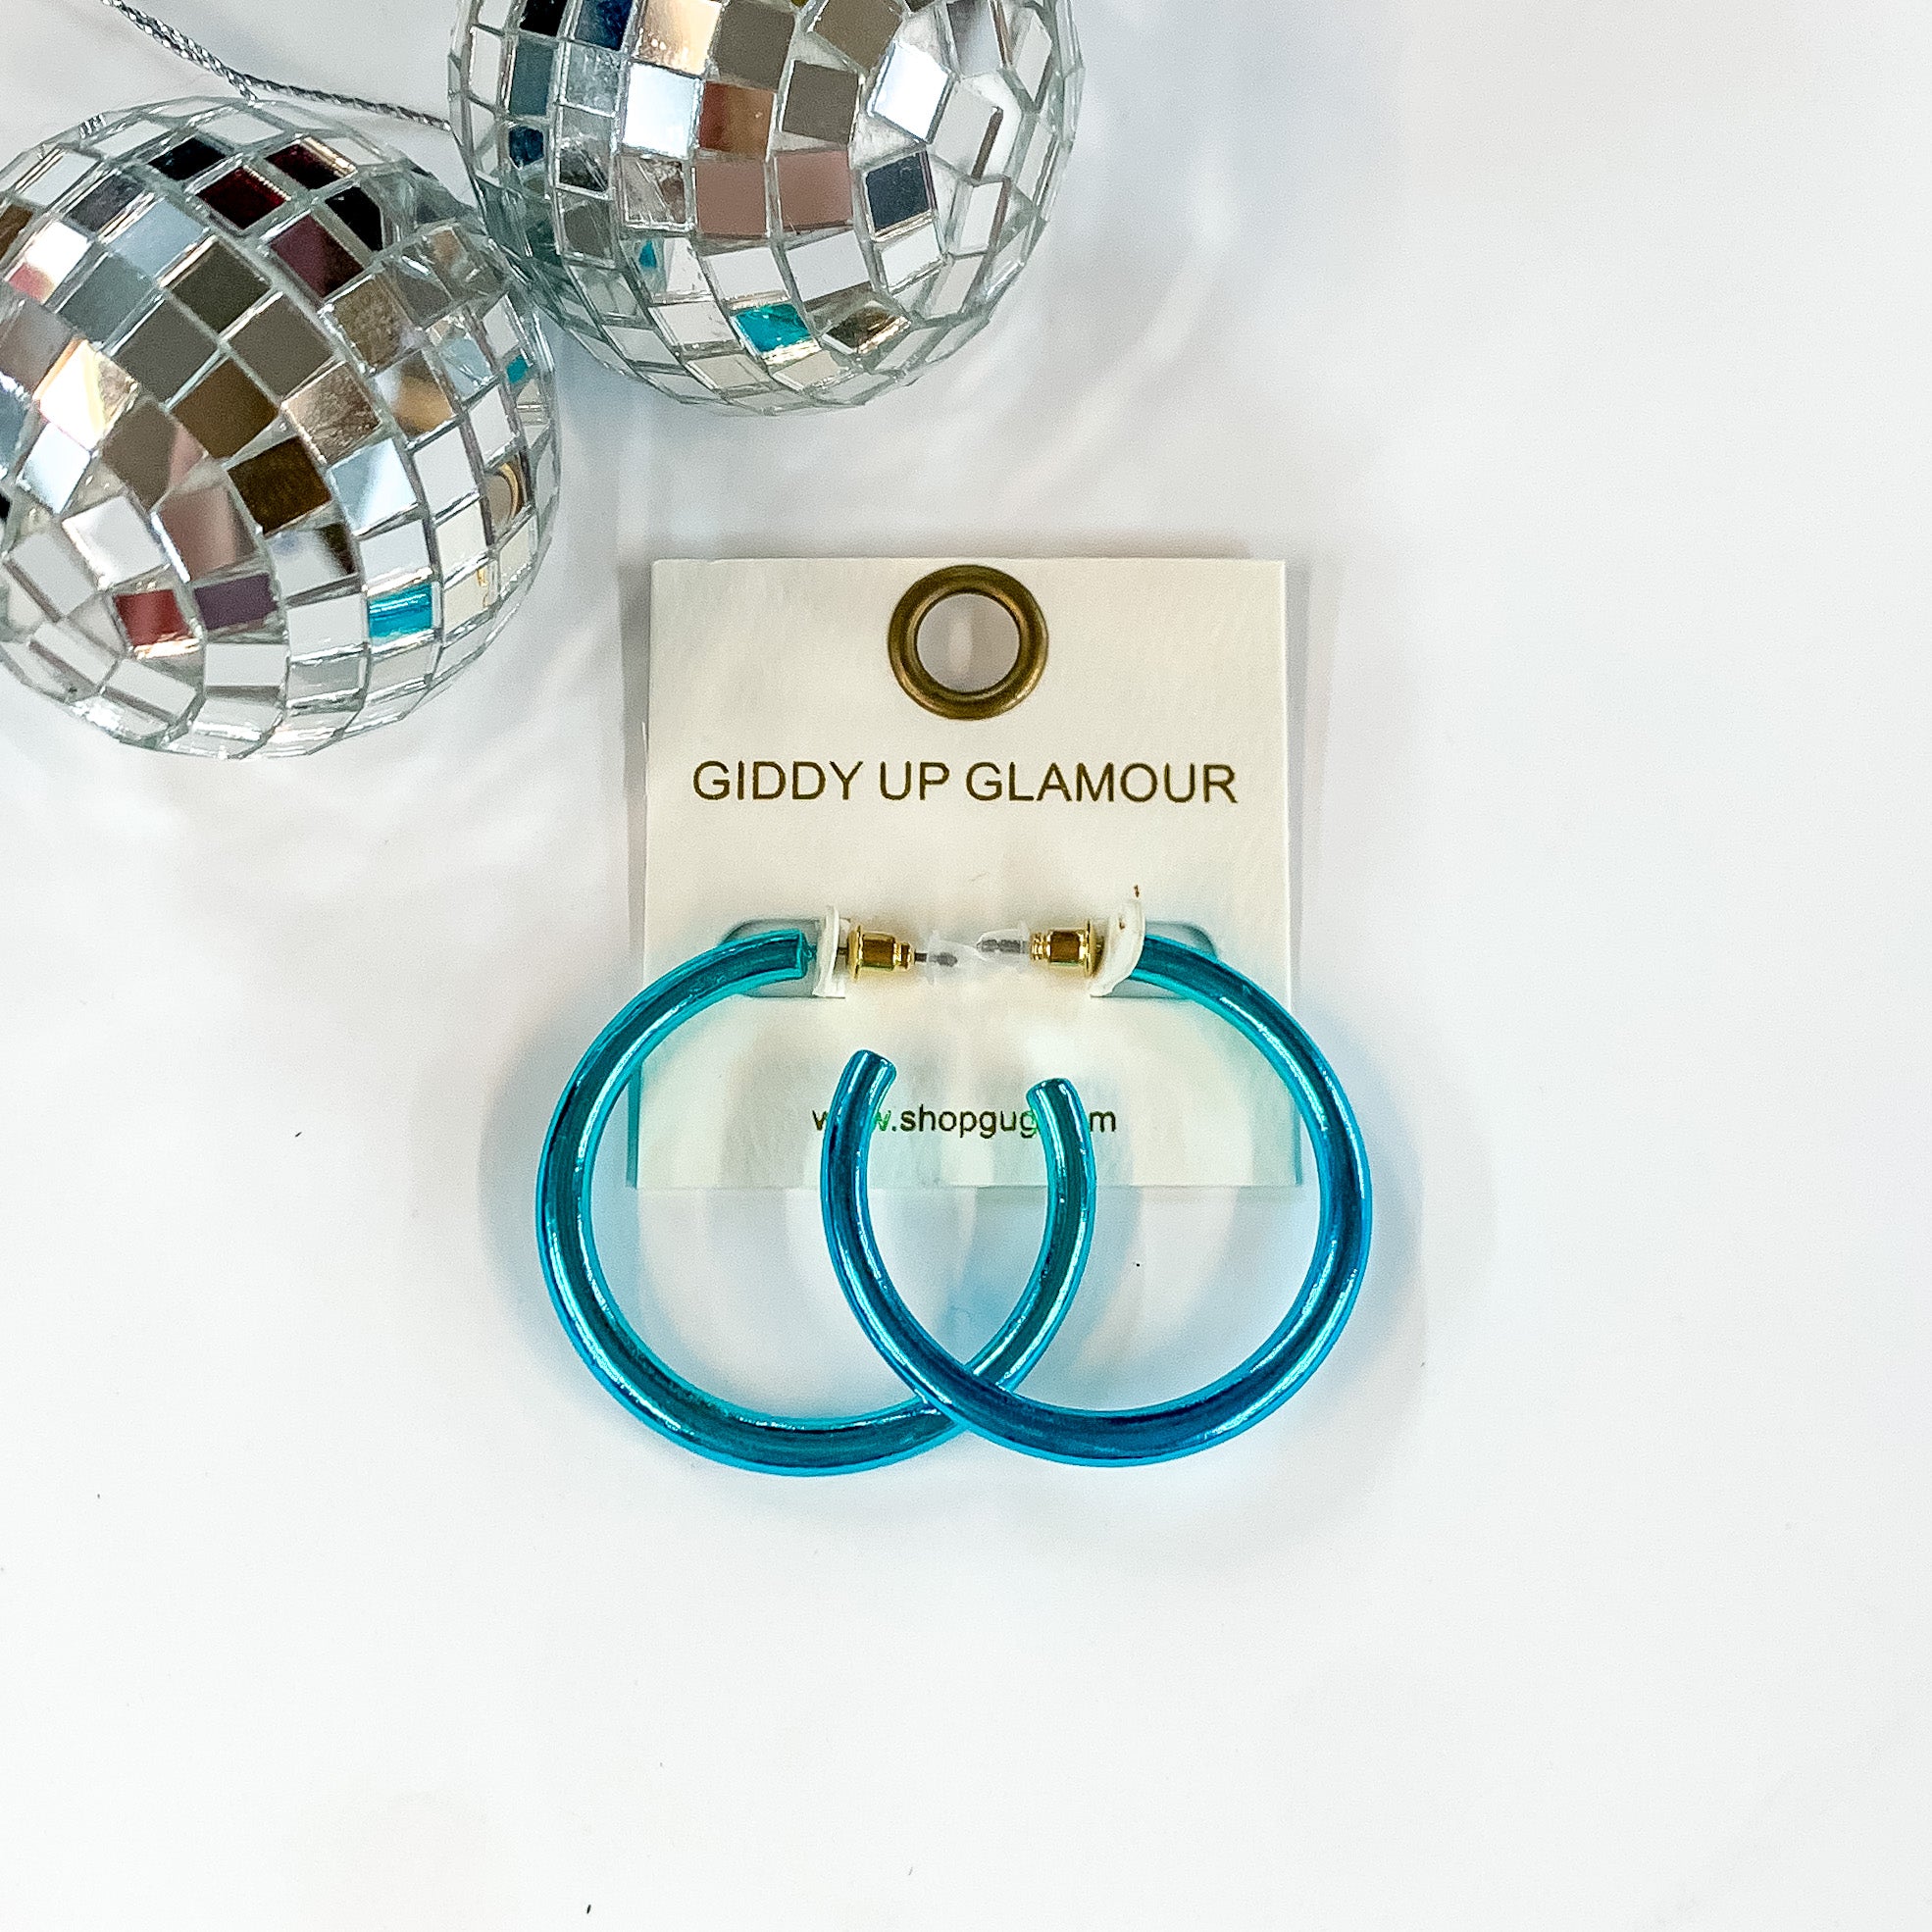 Light Up Medium Neon Hoop Earrings In Blue. Pictured on a white background with disco balls in the top left corner.